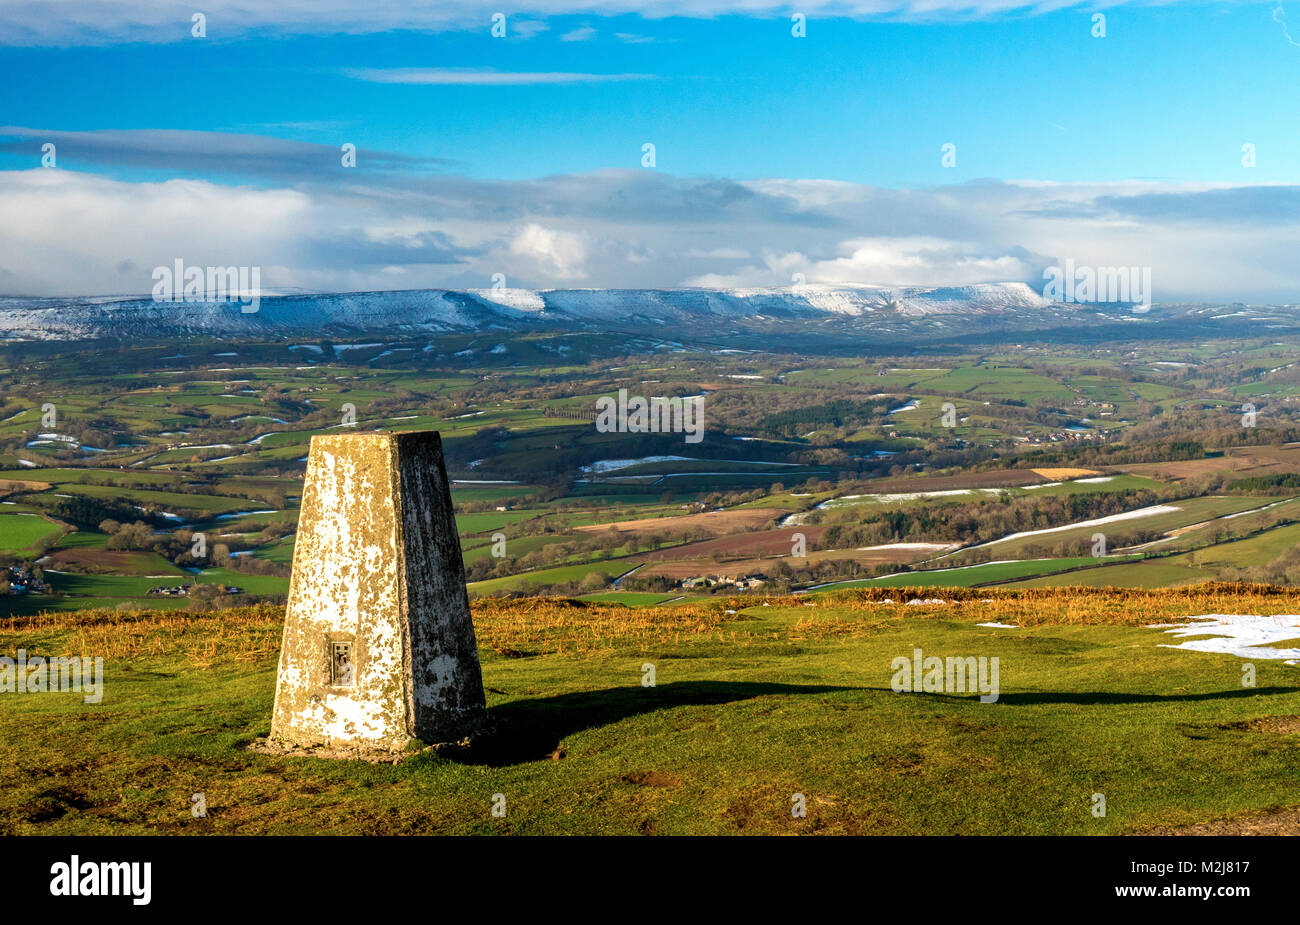 The trig point (triangulation pillar) on Garway Hill, Herefordshire, looking towards the Black Mountains in the Brecon Beacons national park, Wales Stock Photo